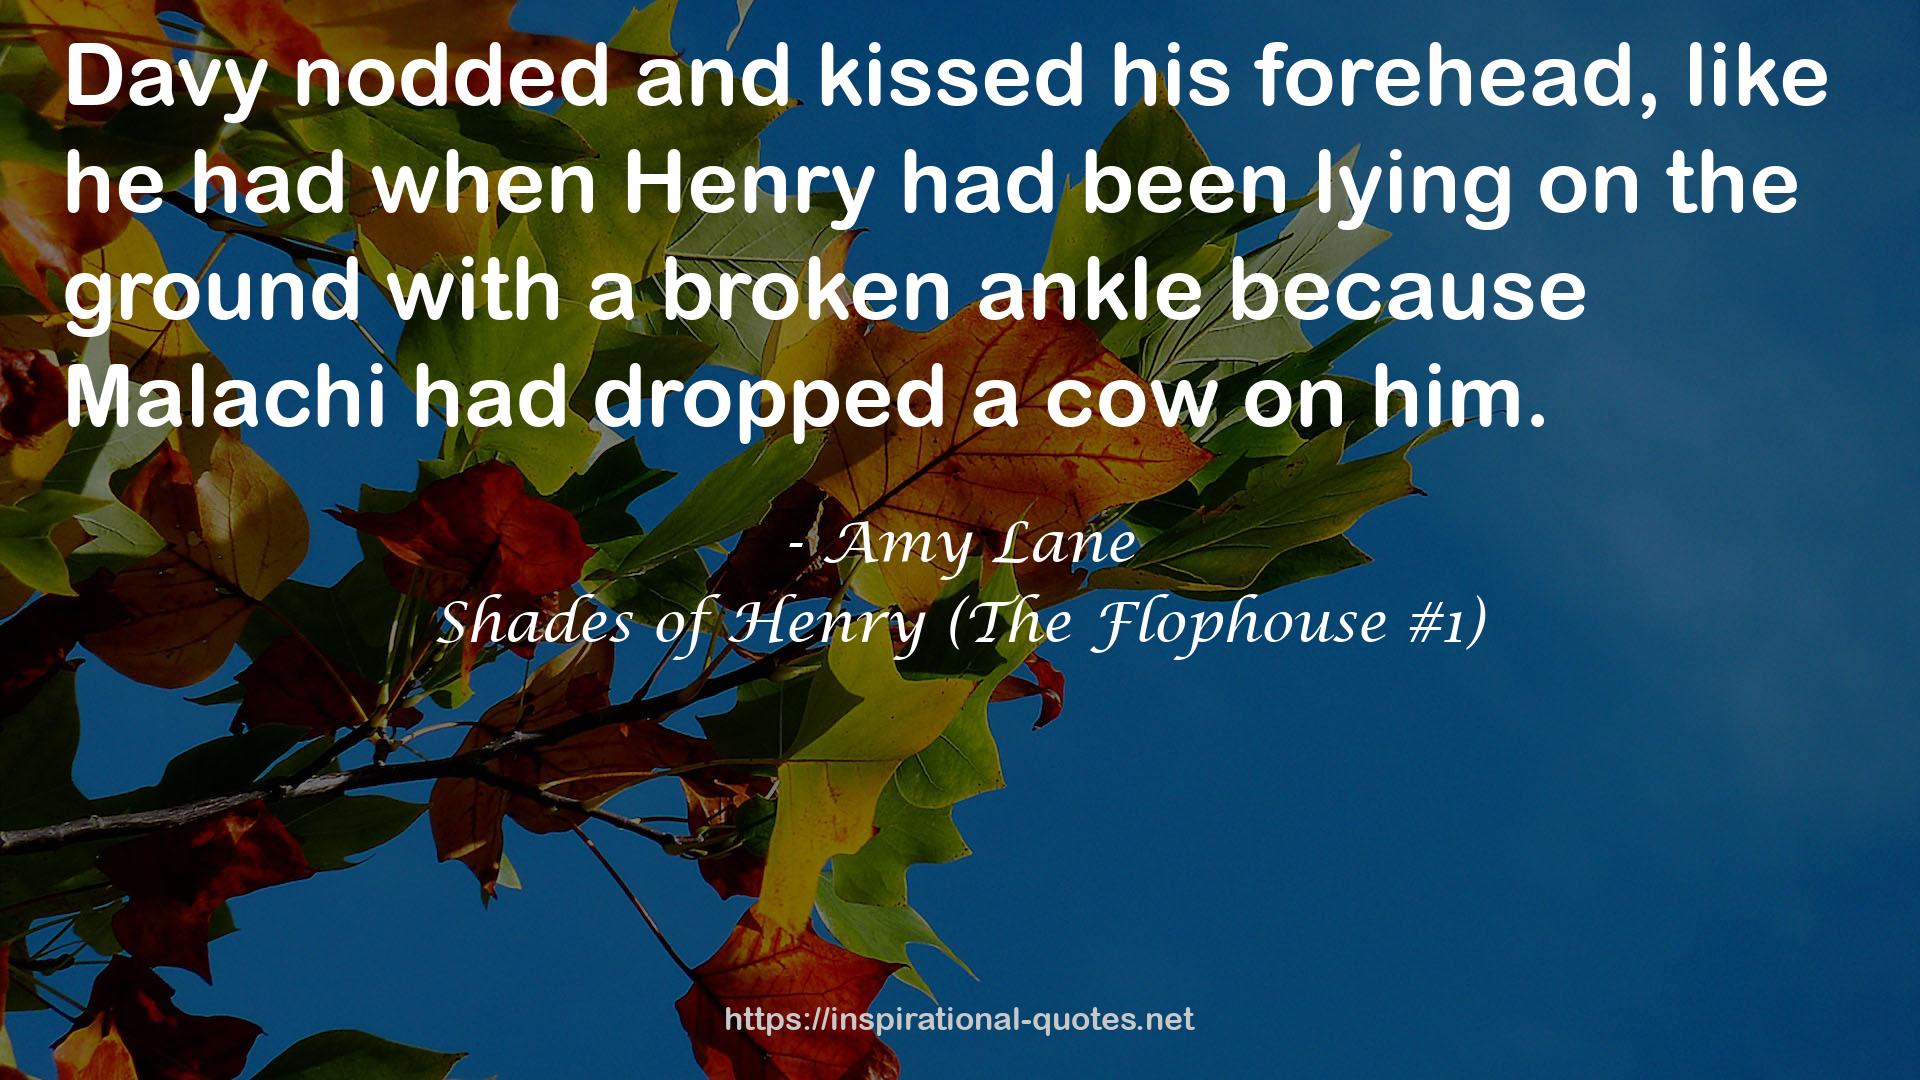 Shades of Henry (The Flophouse #1) QUOTES